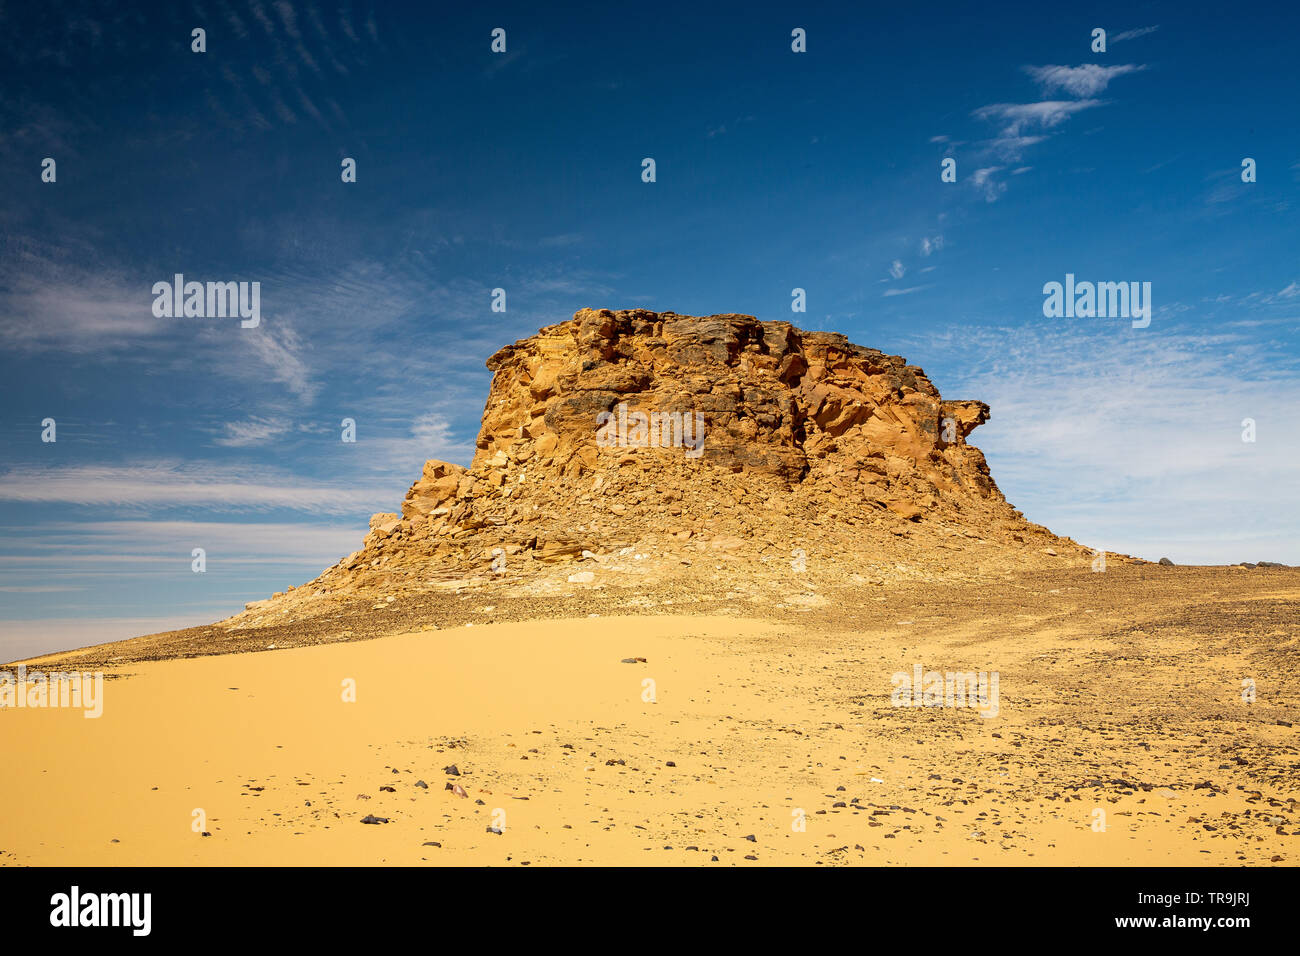 Jebel Peak, a crumbling sandstone mountain, isolated an surrounded by the flat western desert of sudan with blue sky and white cloud formations Stock Photo